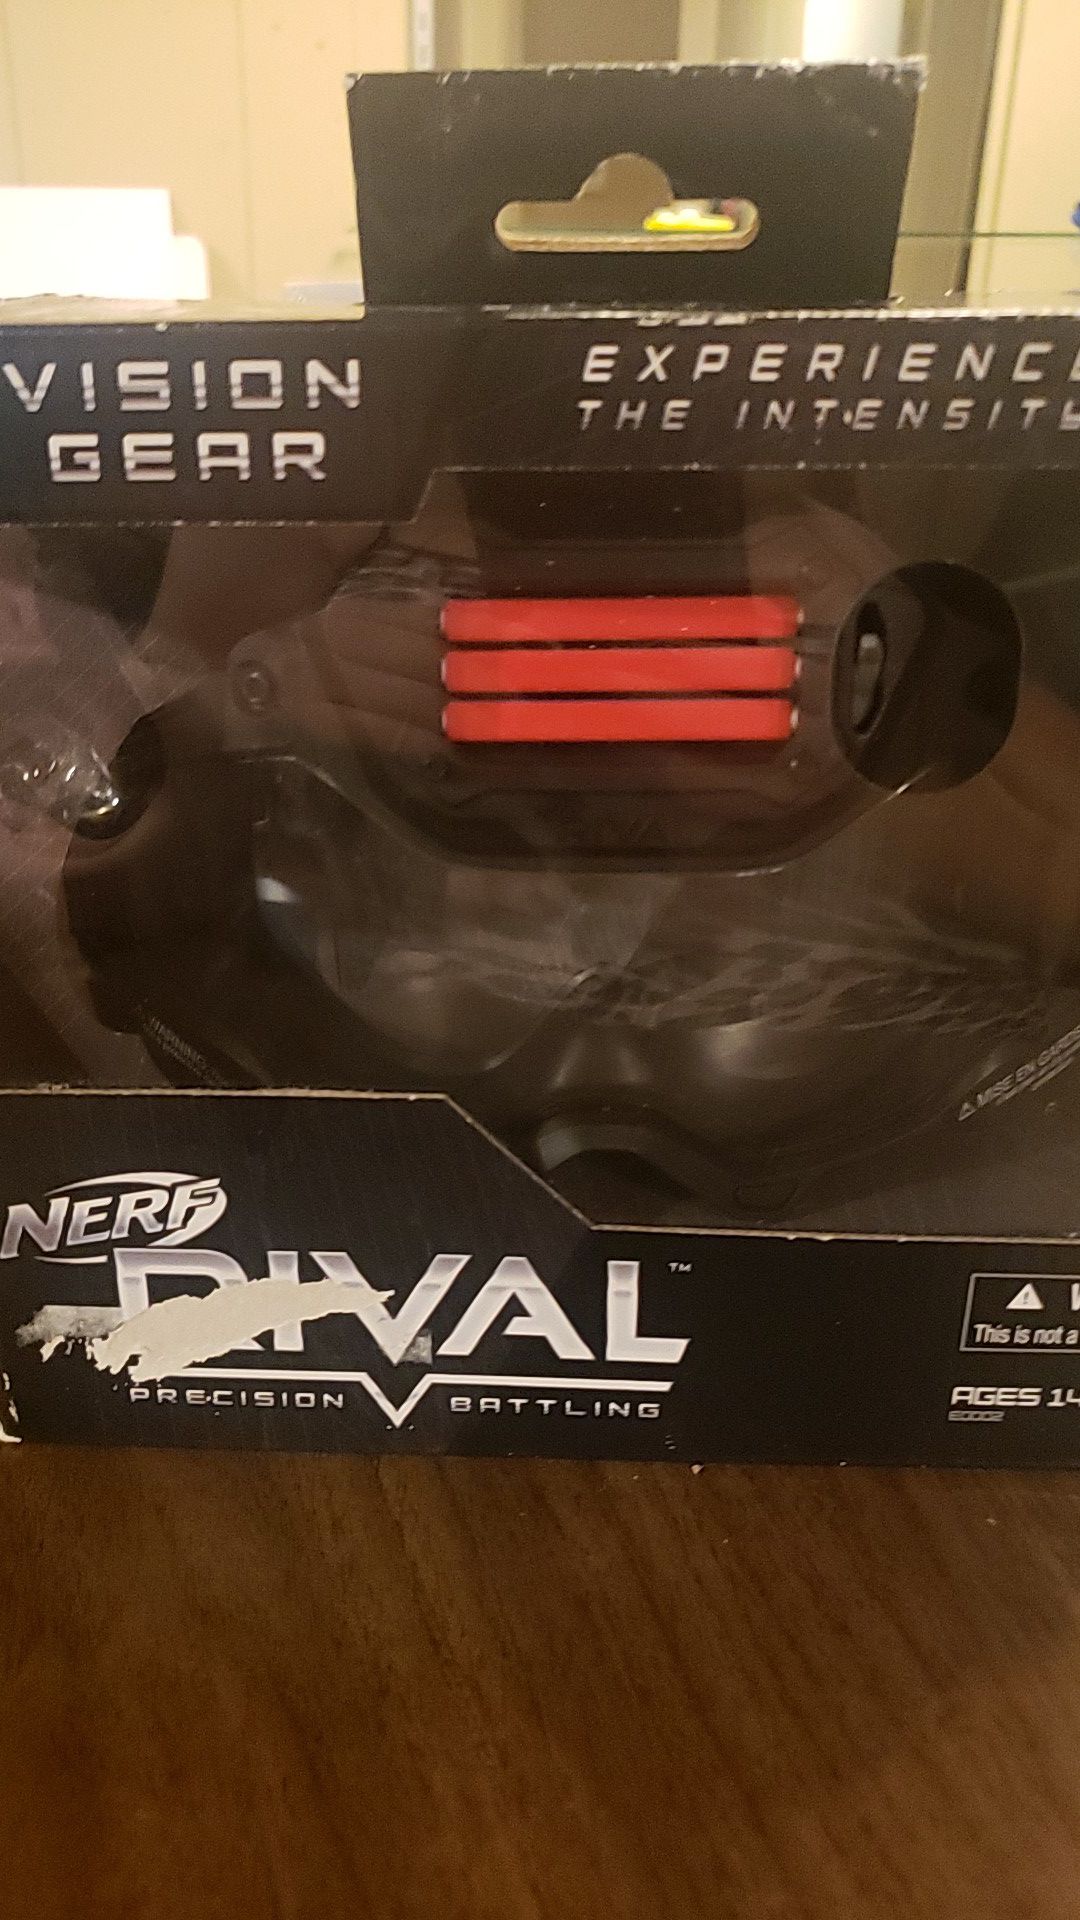 New Nerf Vision gear